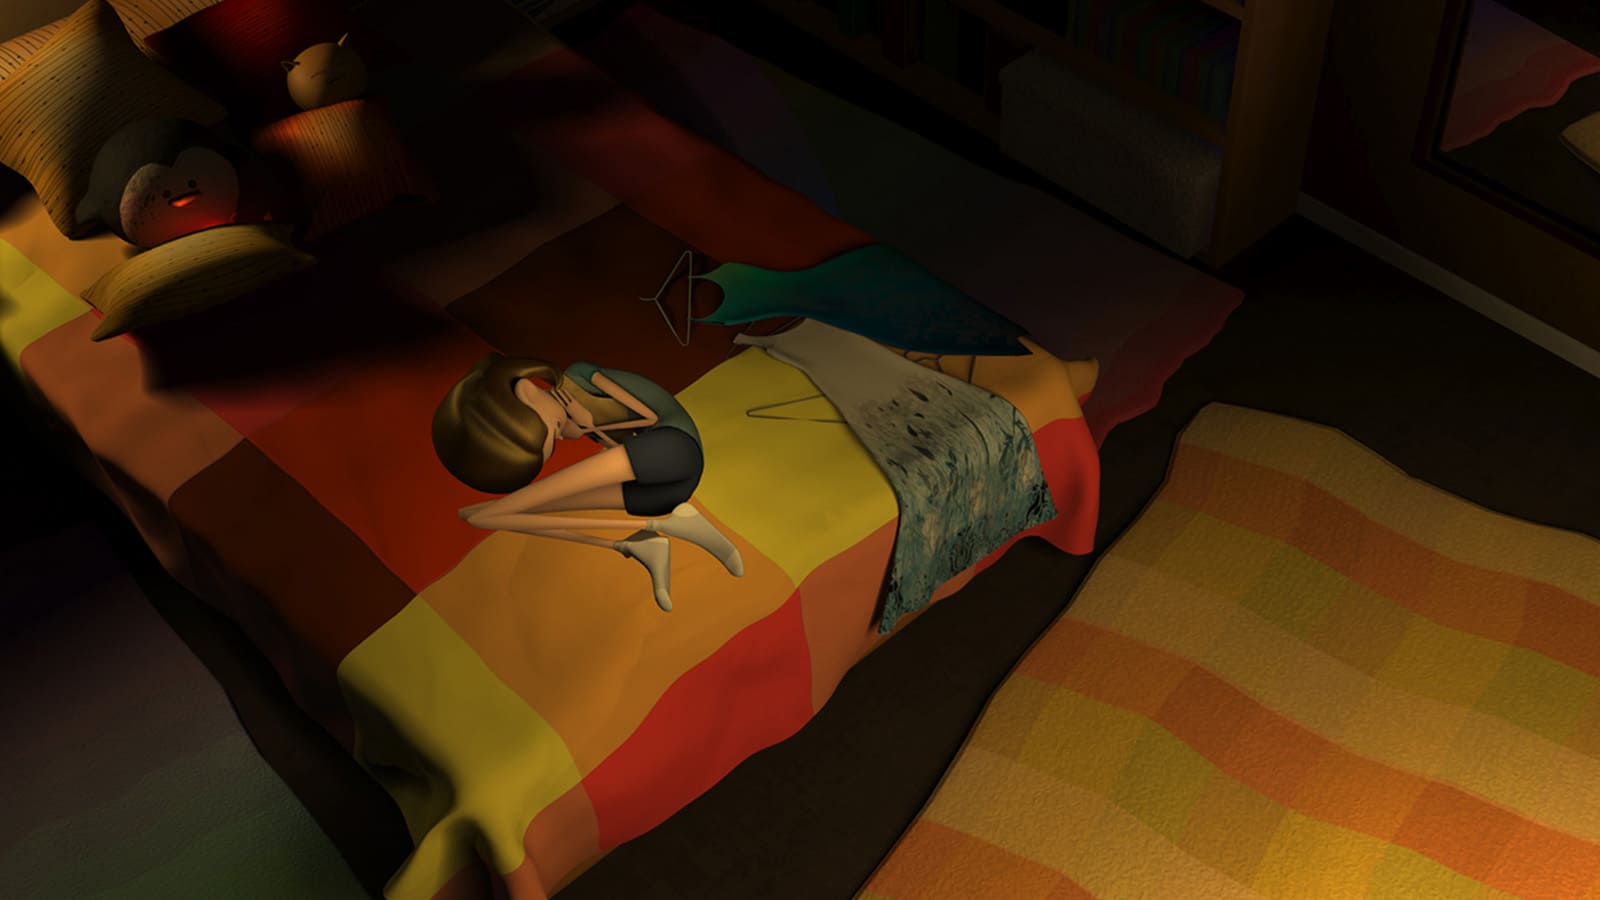 Skye, the protagonist, hasn't gone to the date; insecurity has taken over her, and she is lying on her bed.